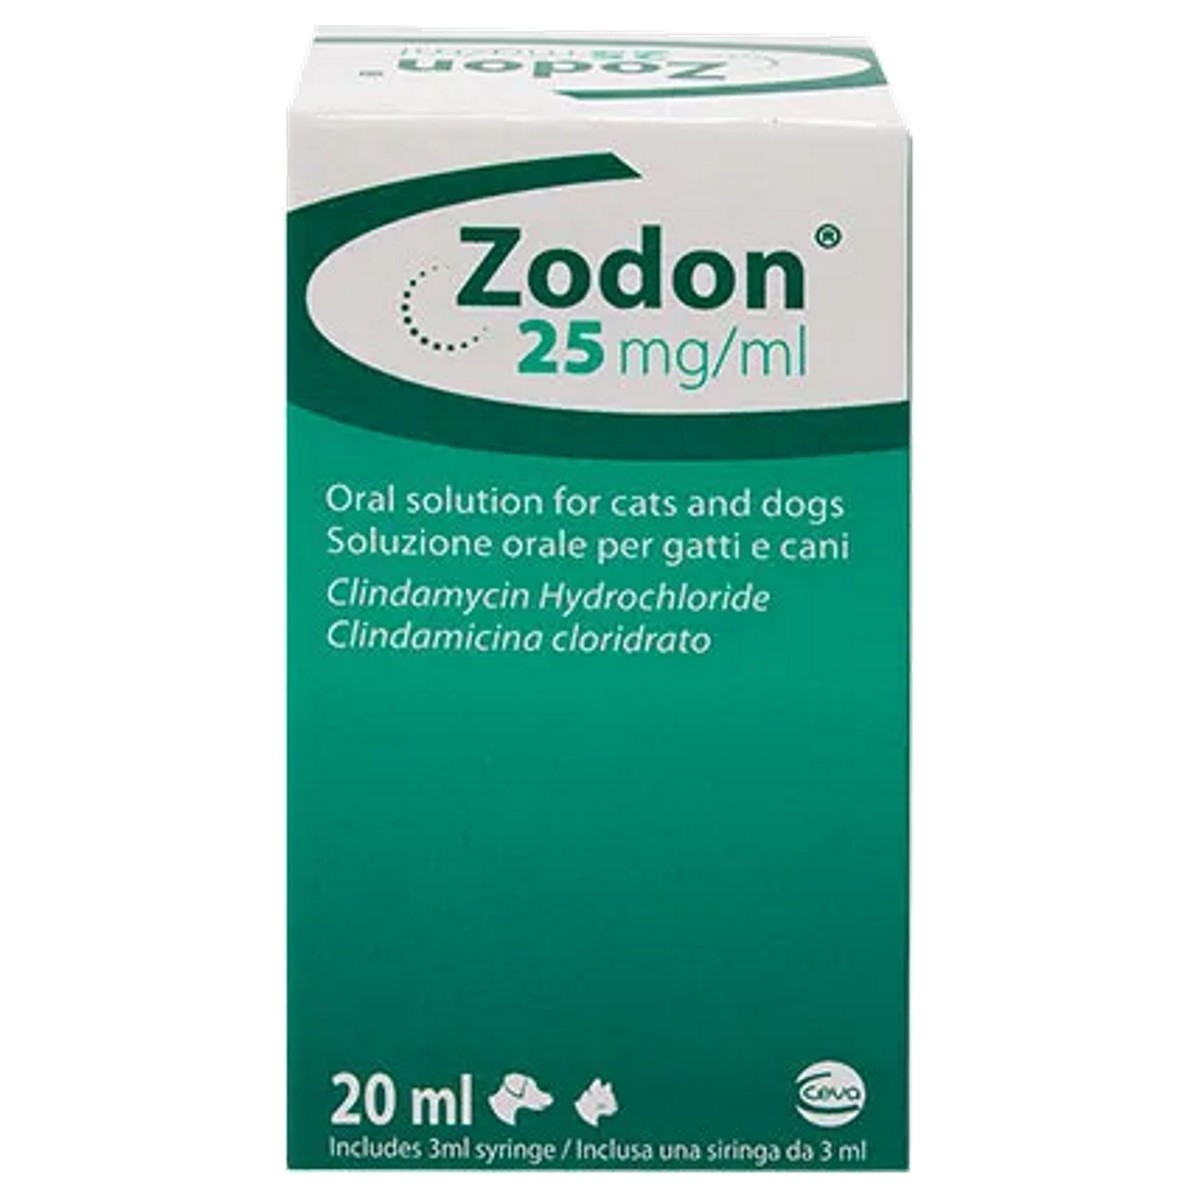 Zodon 25mg Ml Oral Solution For Cats And Dogs From 11 21